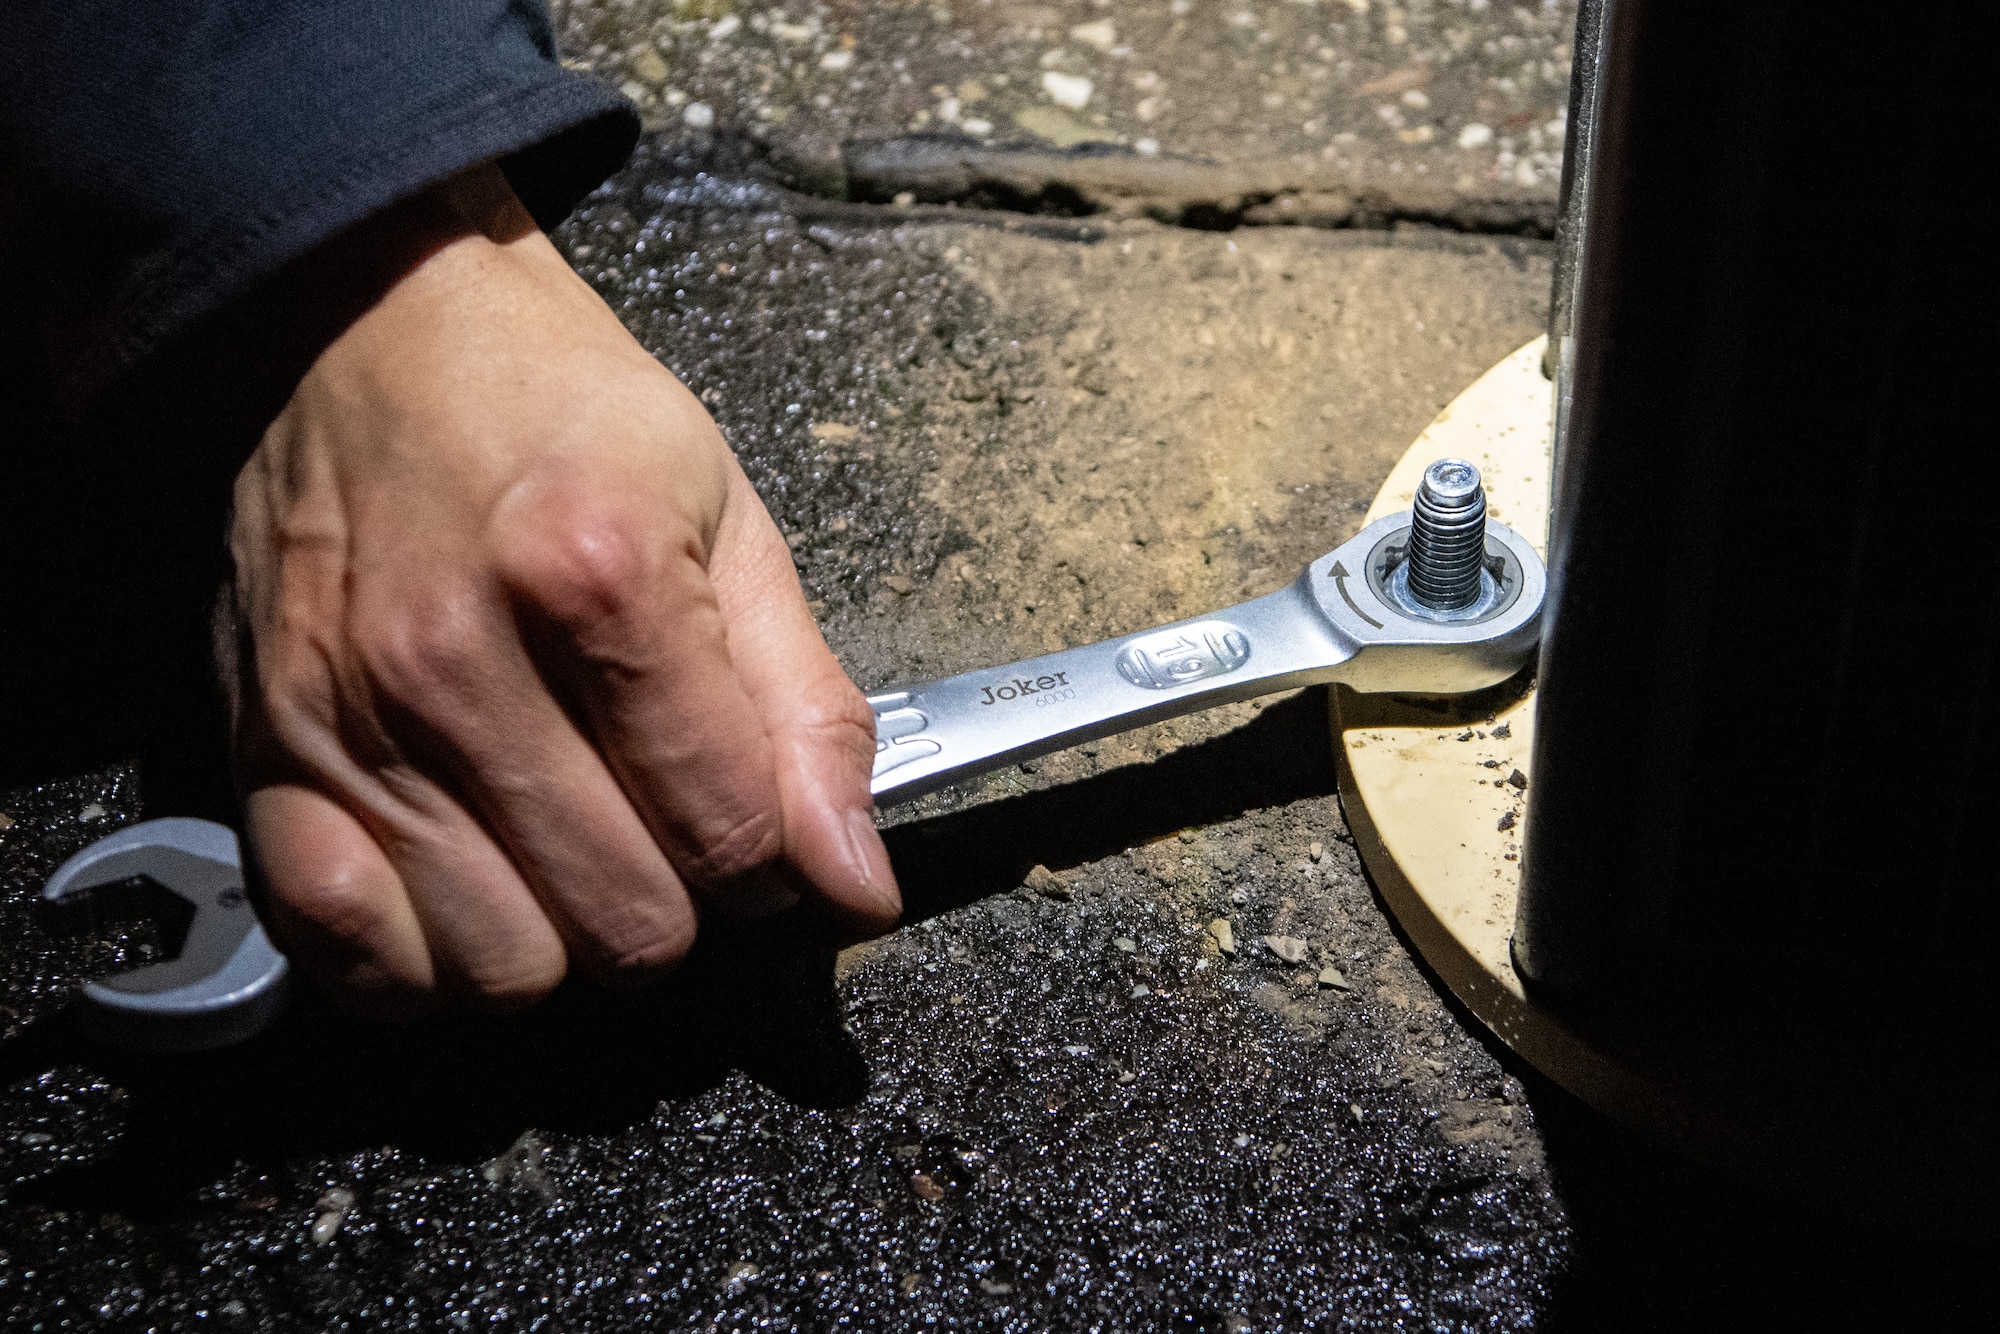 A hand uses a wrench to tighten a bolt to ground a light.